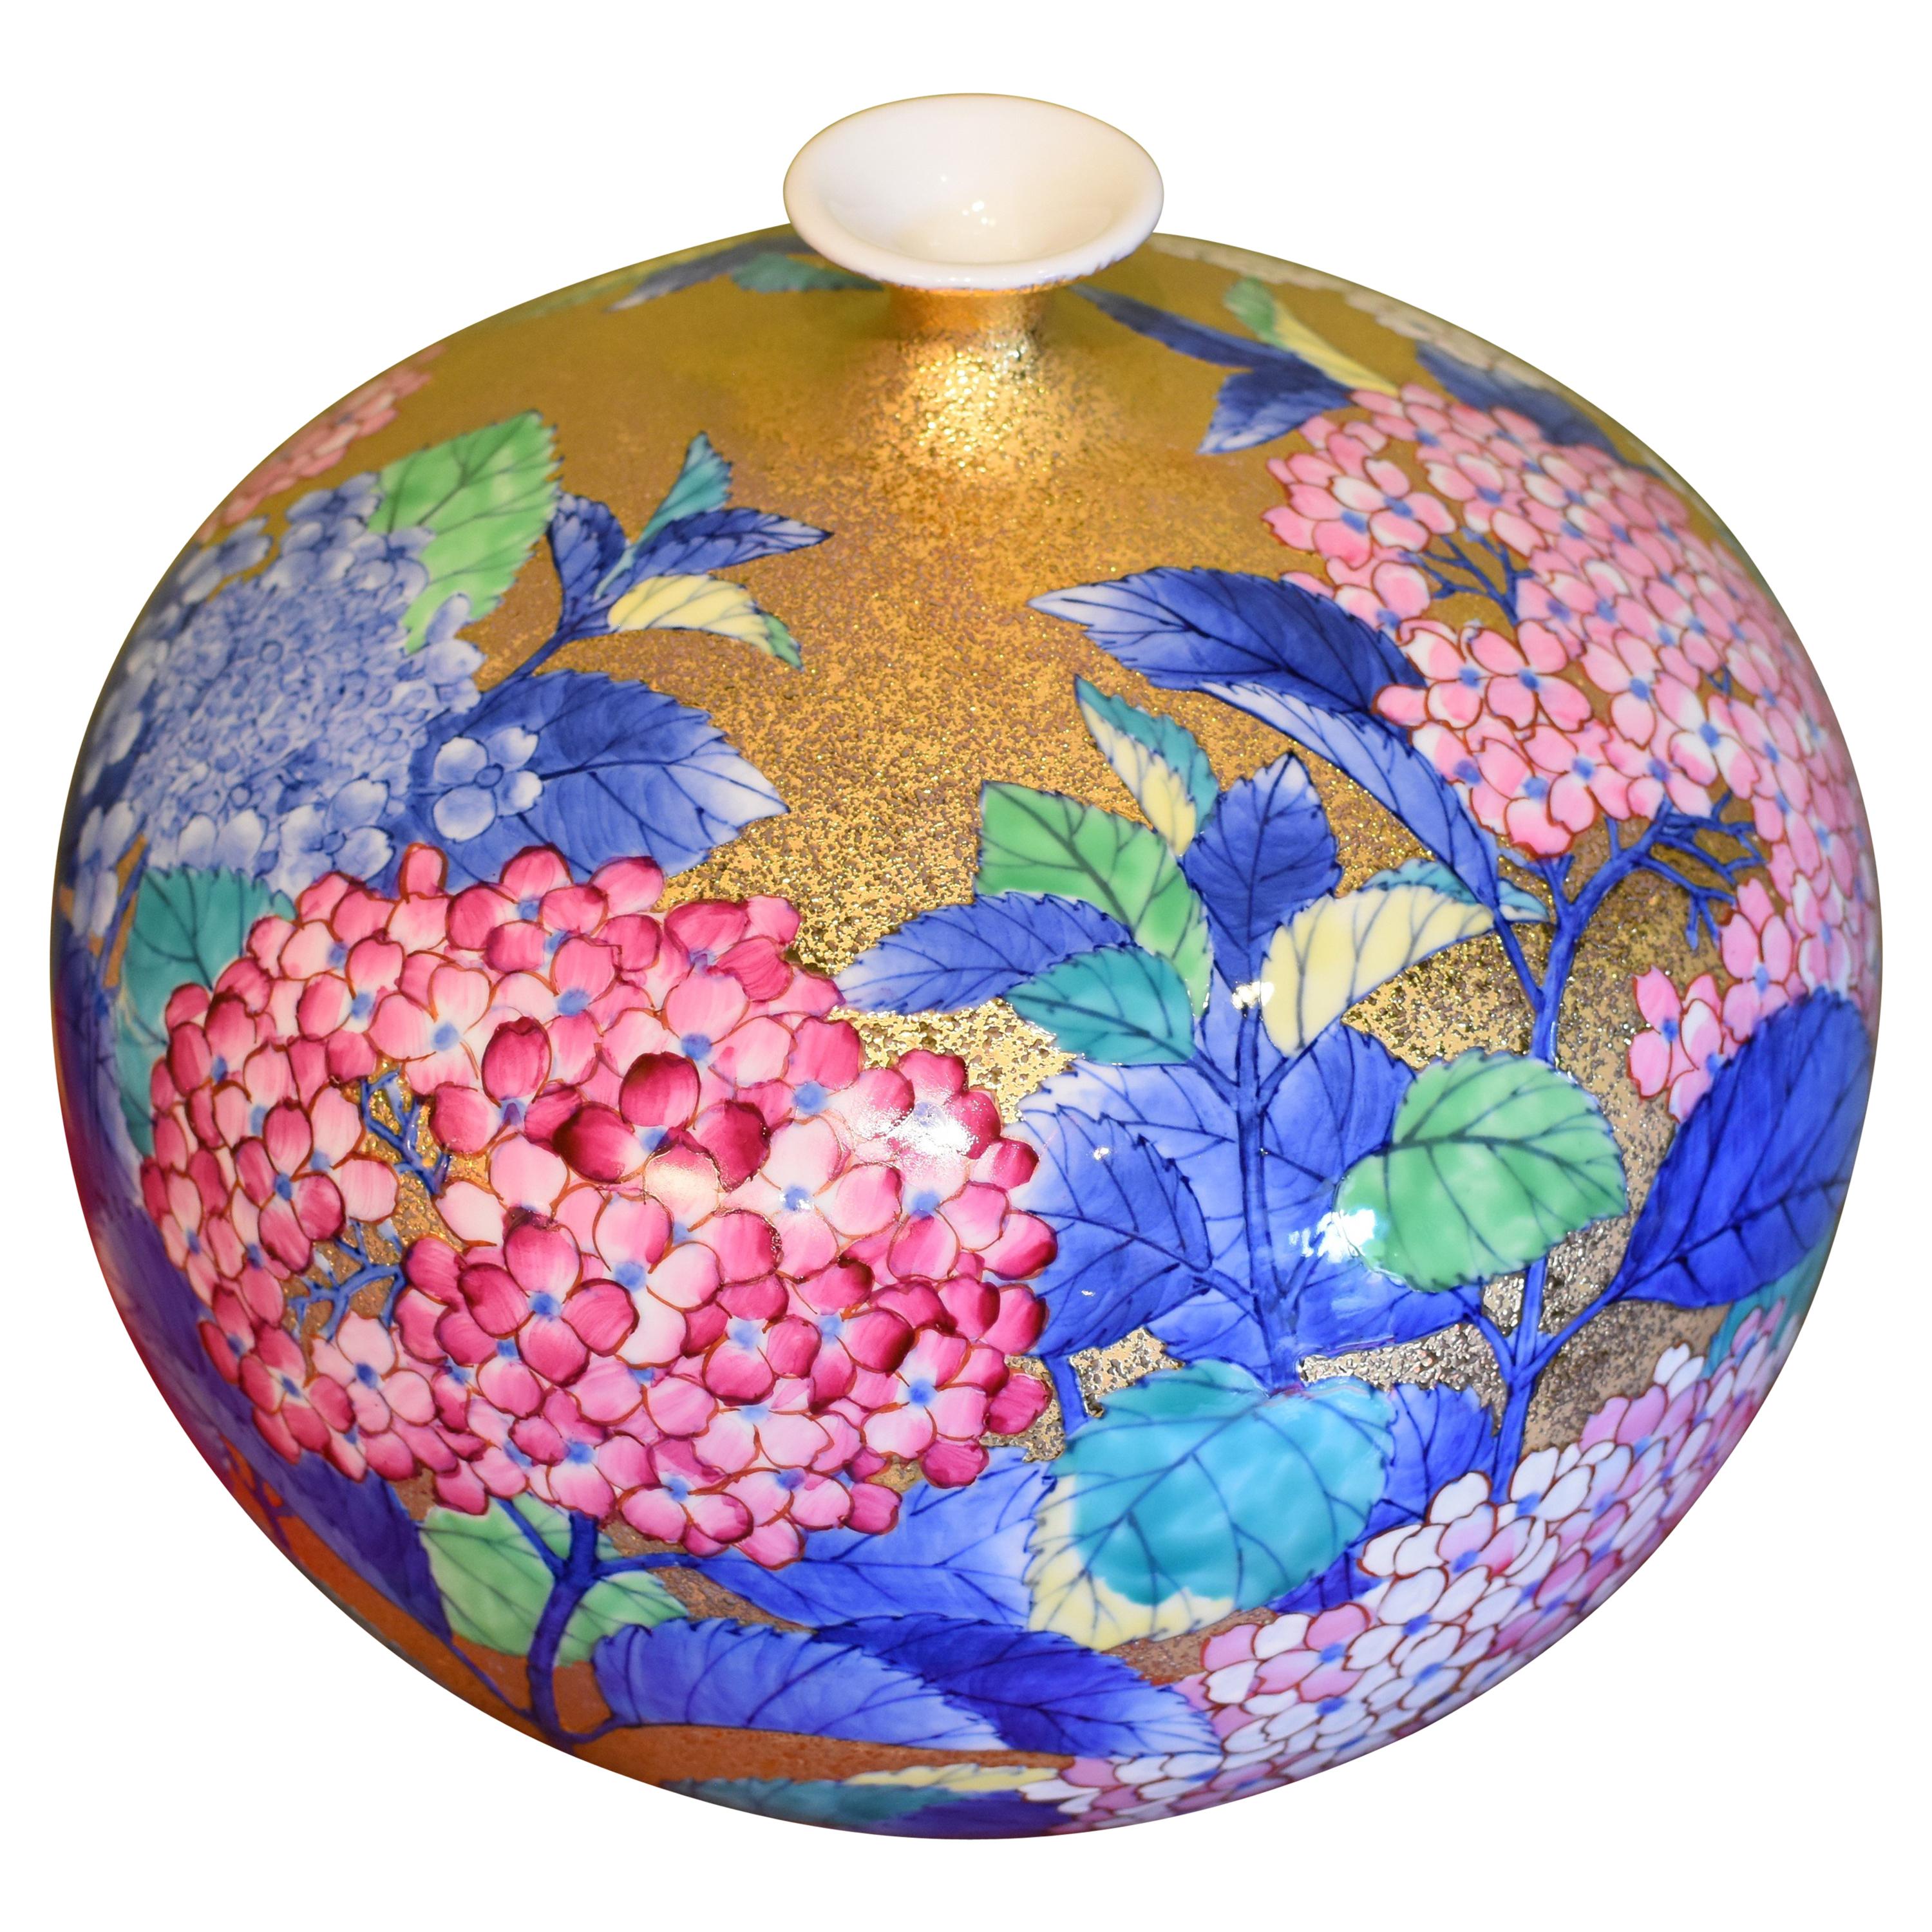 Gilded Japanese Hand-Painted Imari Porcelain Vase by Contemporary Master Artist